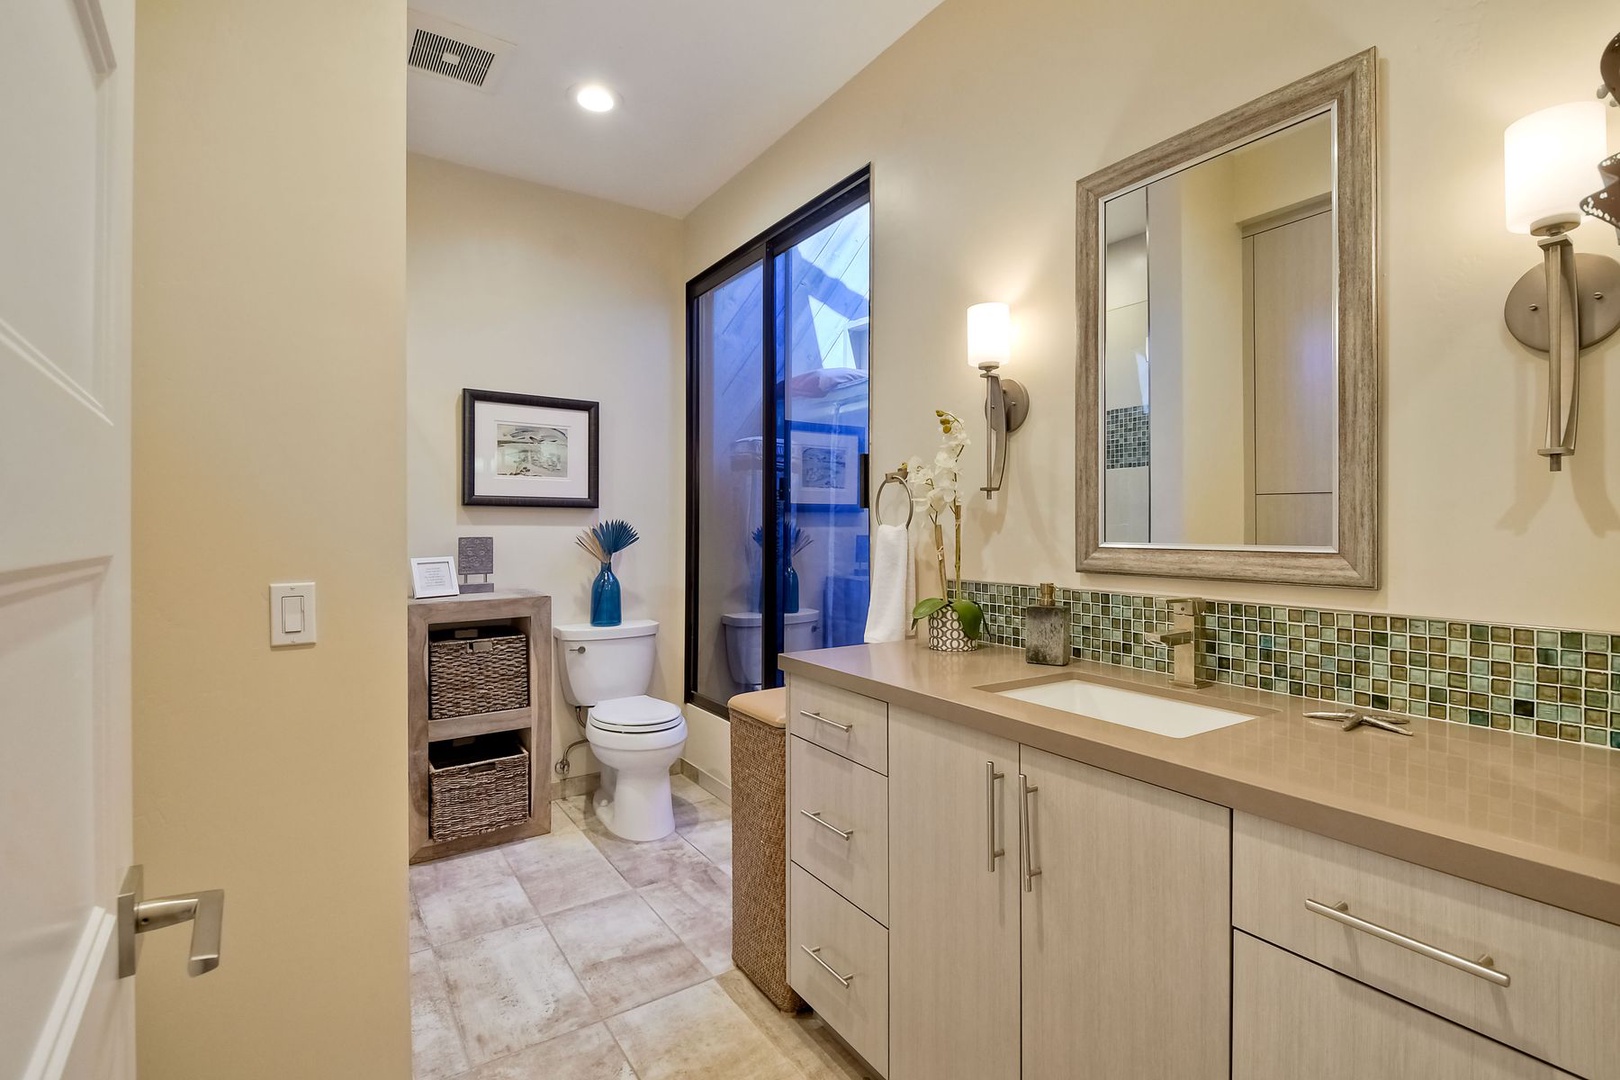 The 2nd floor’s shared full bath offers a large single vanity & shower/tub combo